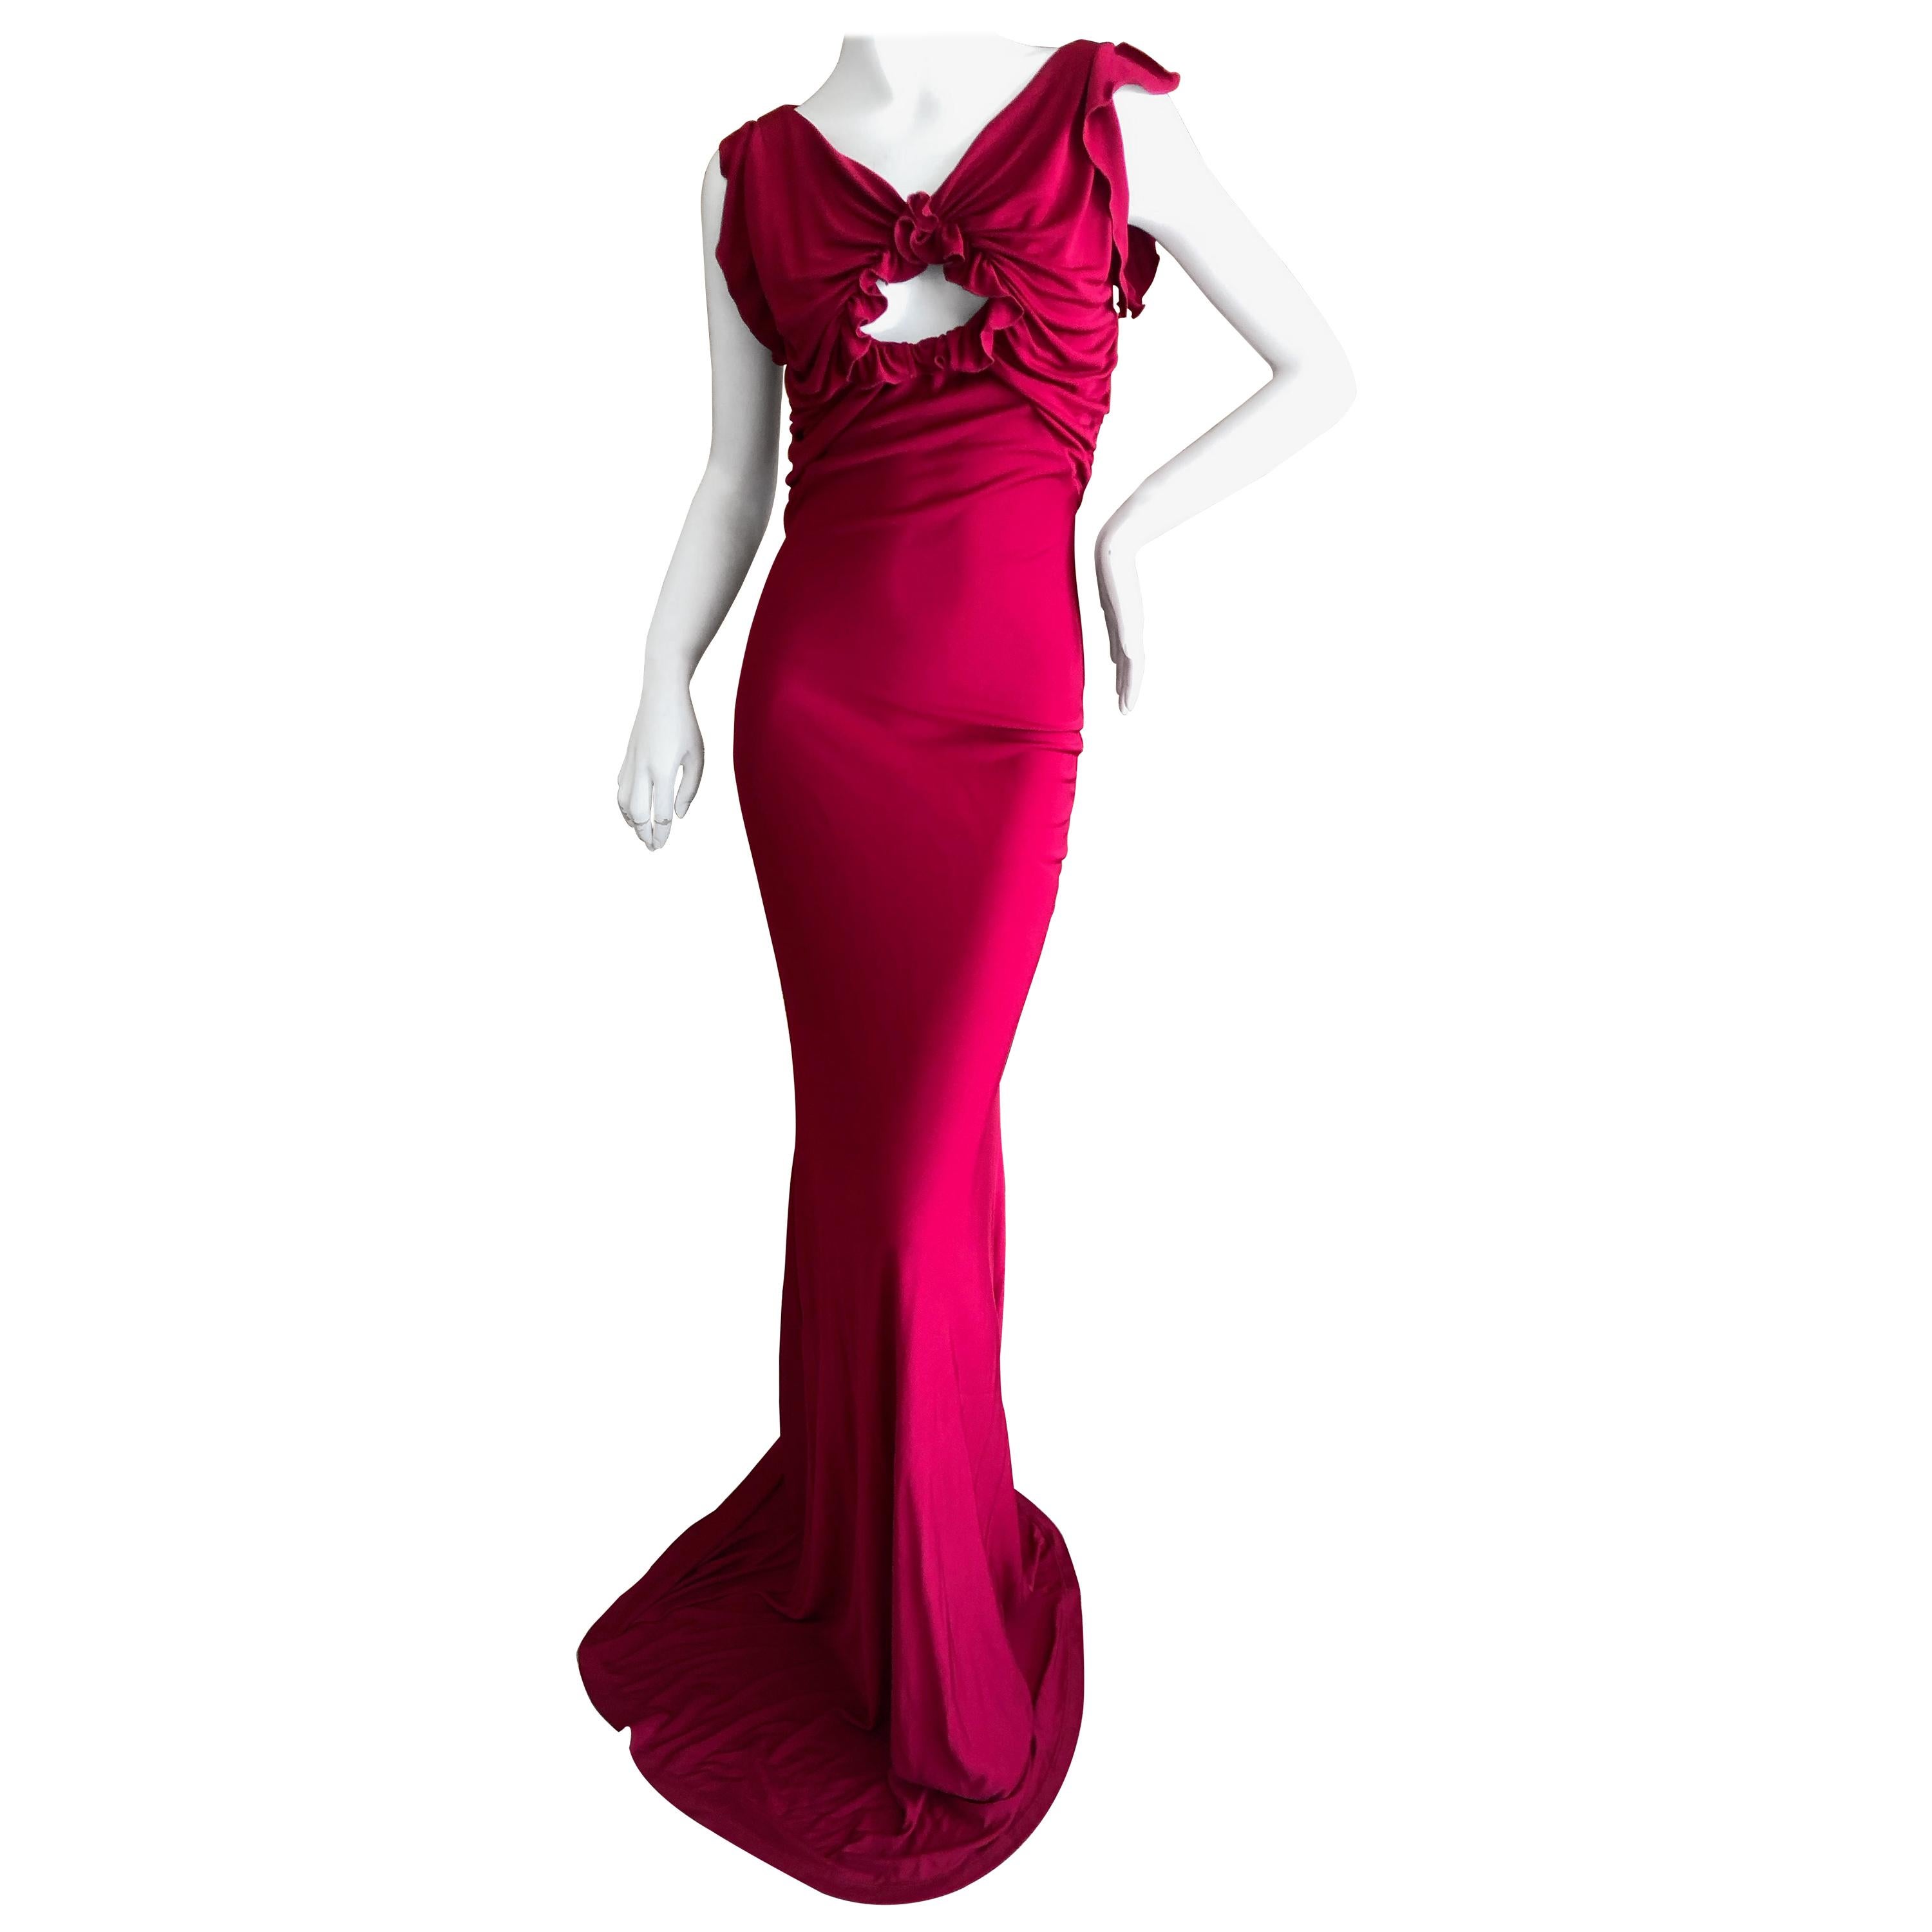   John Galliano Vintage Bias Cut Red Evening Dress with Keyhole Details For Sale